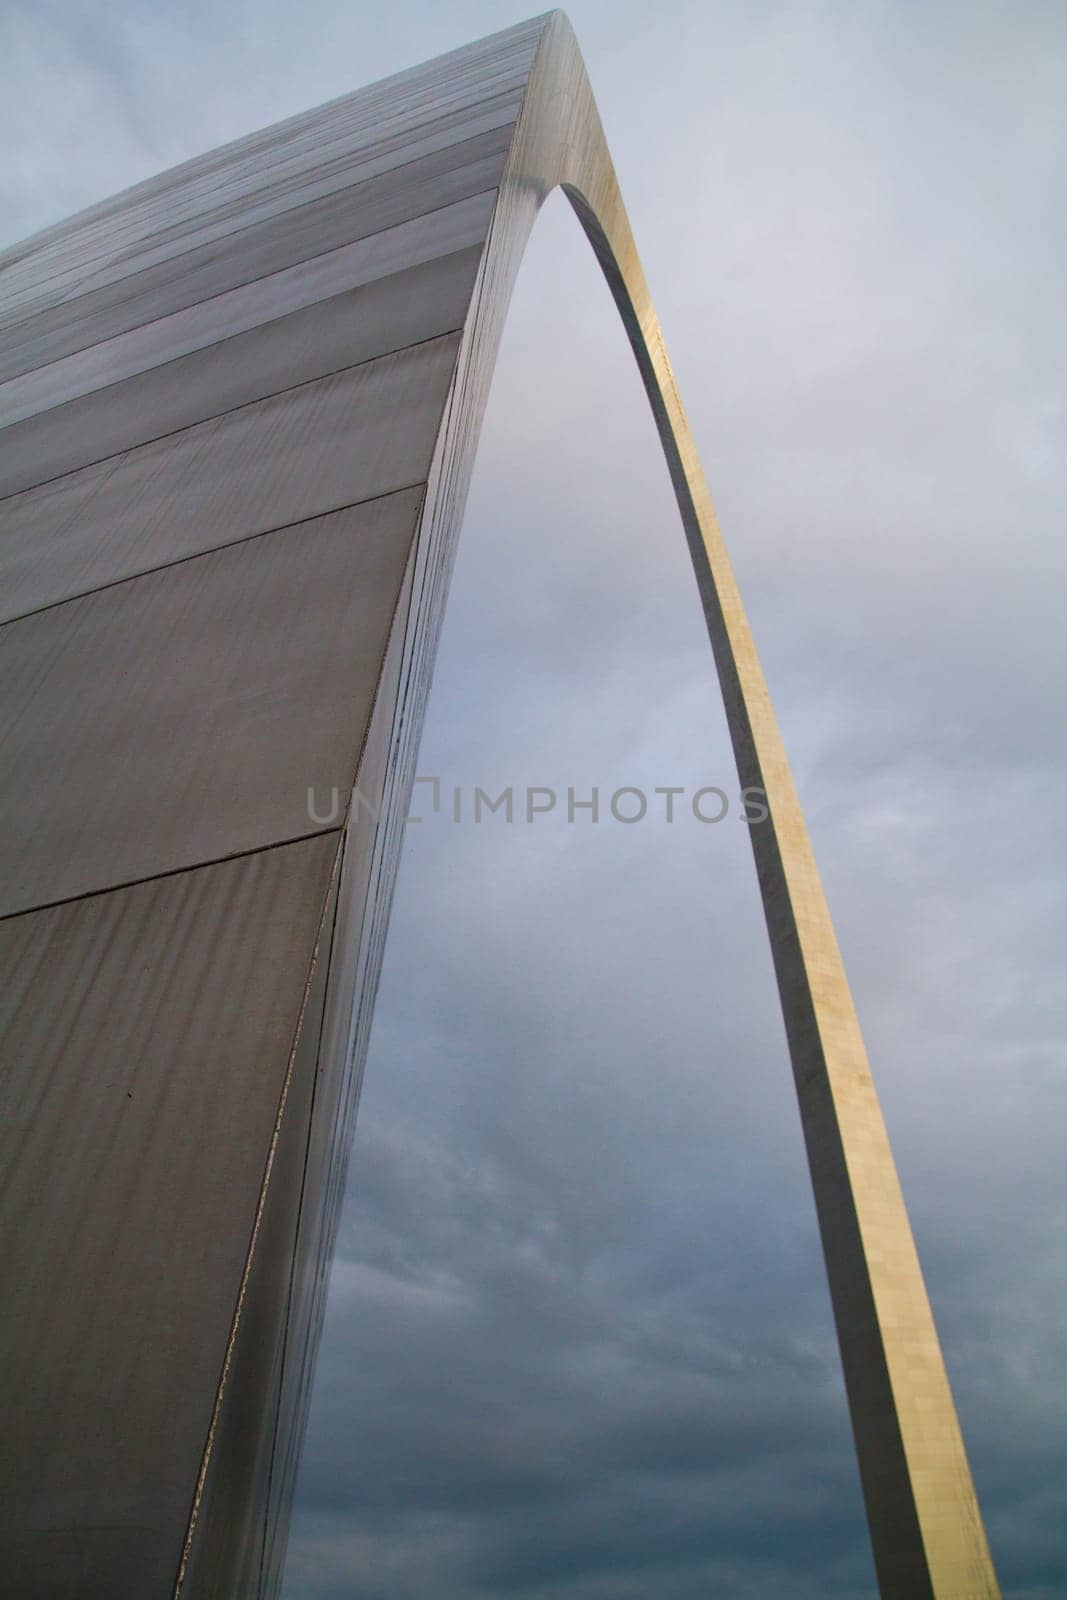 Iconic St. Louis Arch stands tall against a moody sky, showcasing its sleek metallic curves and grandeur. Perfect for travel, architecture, and design themes.